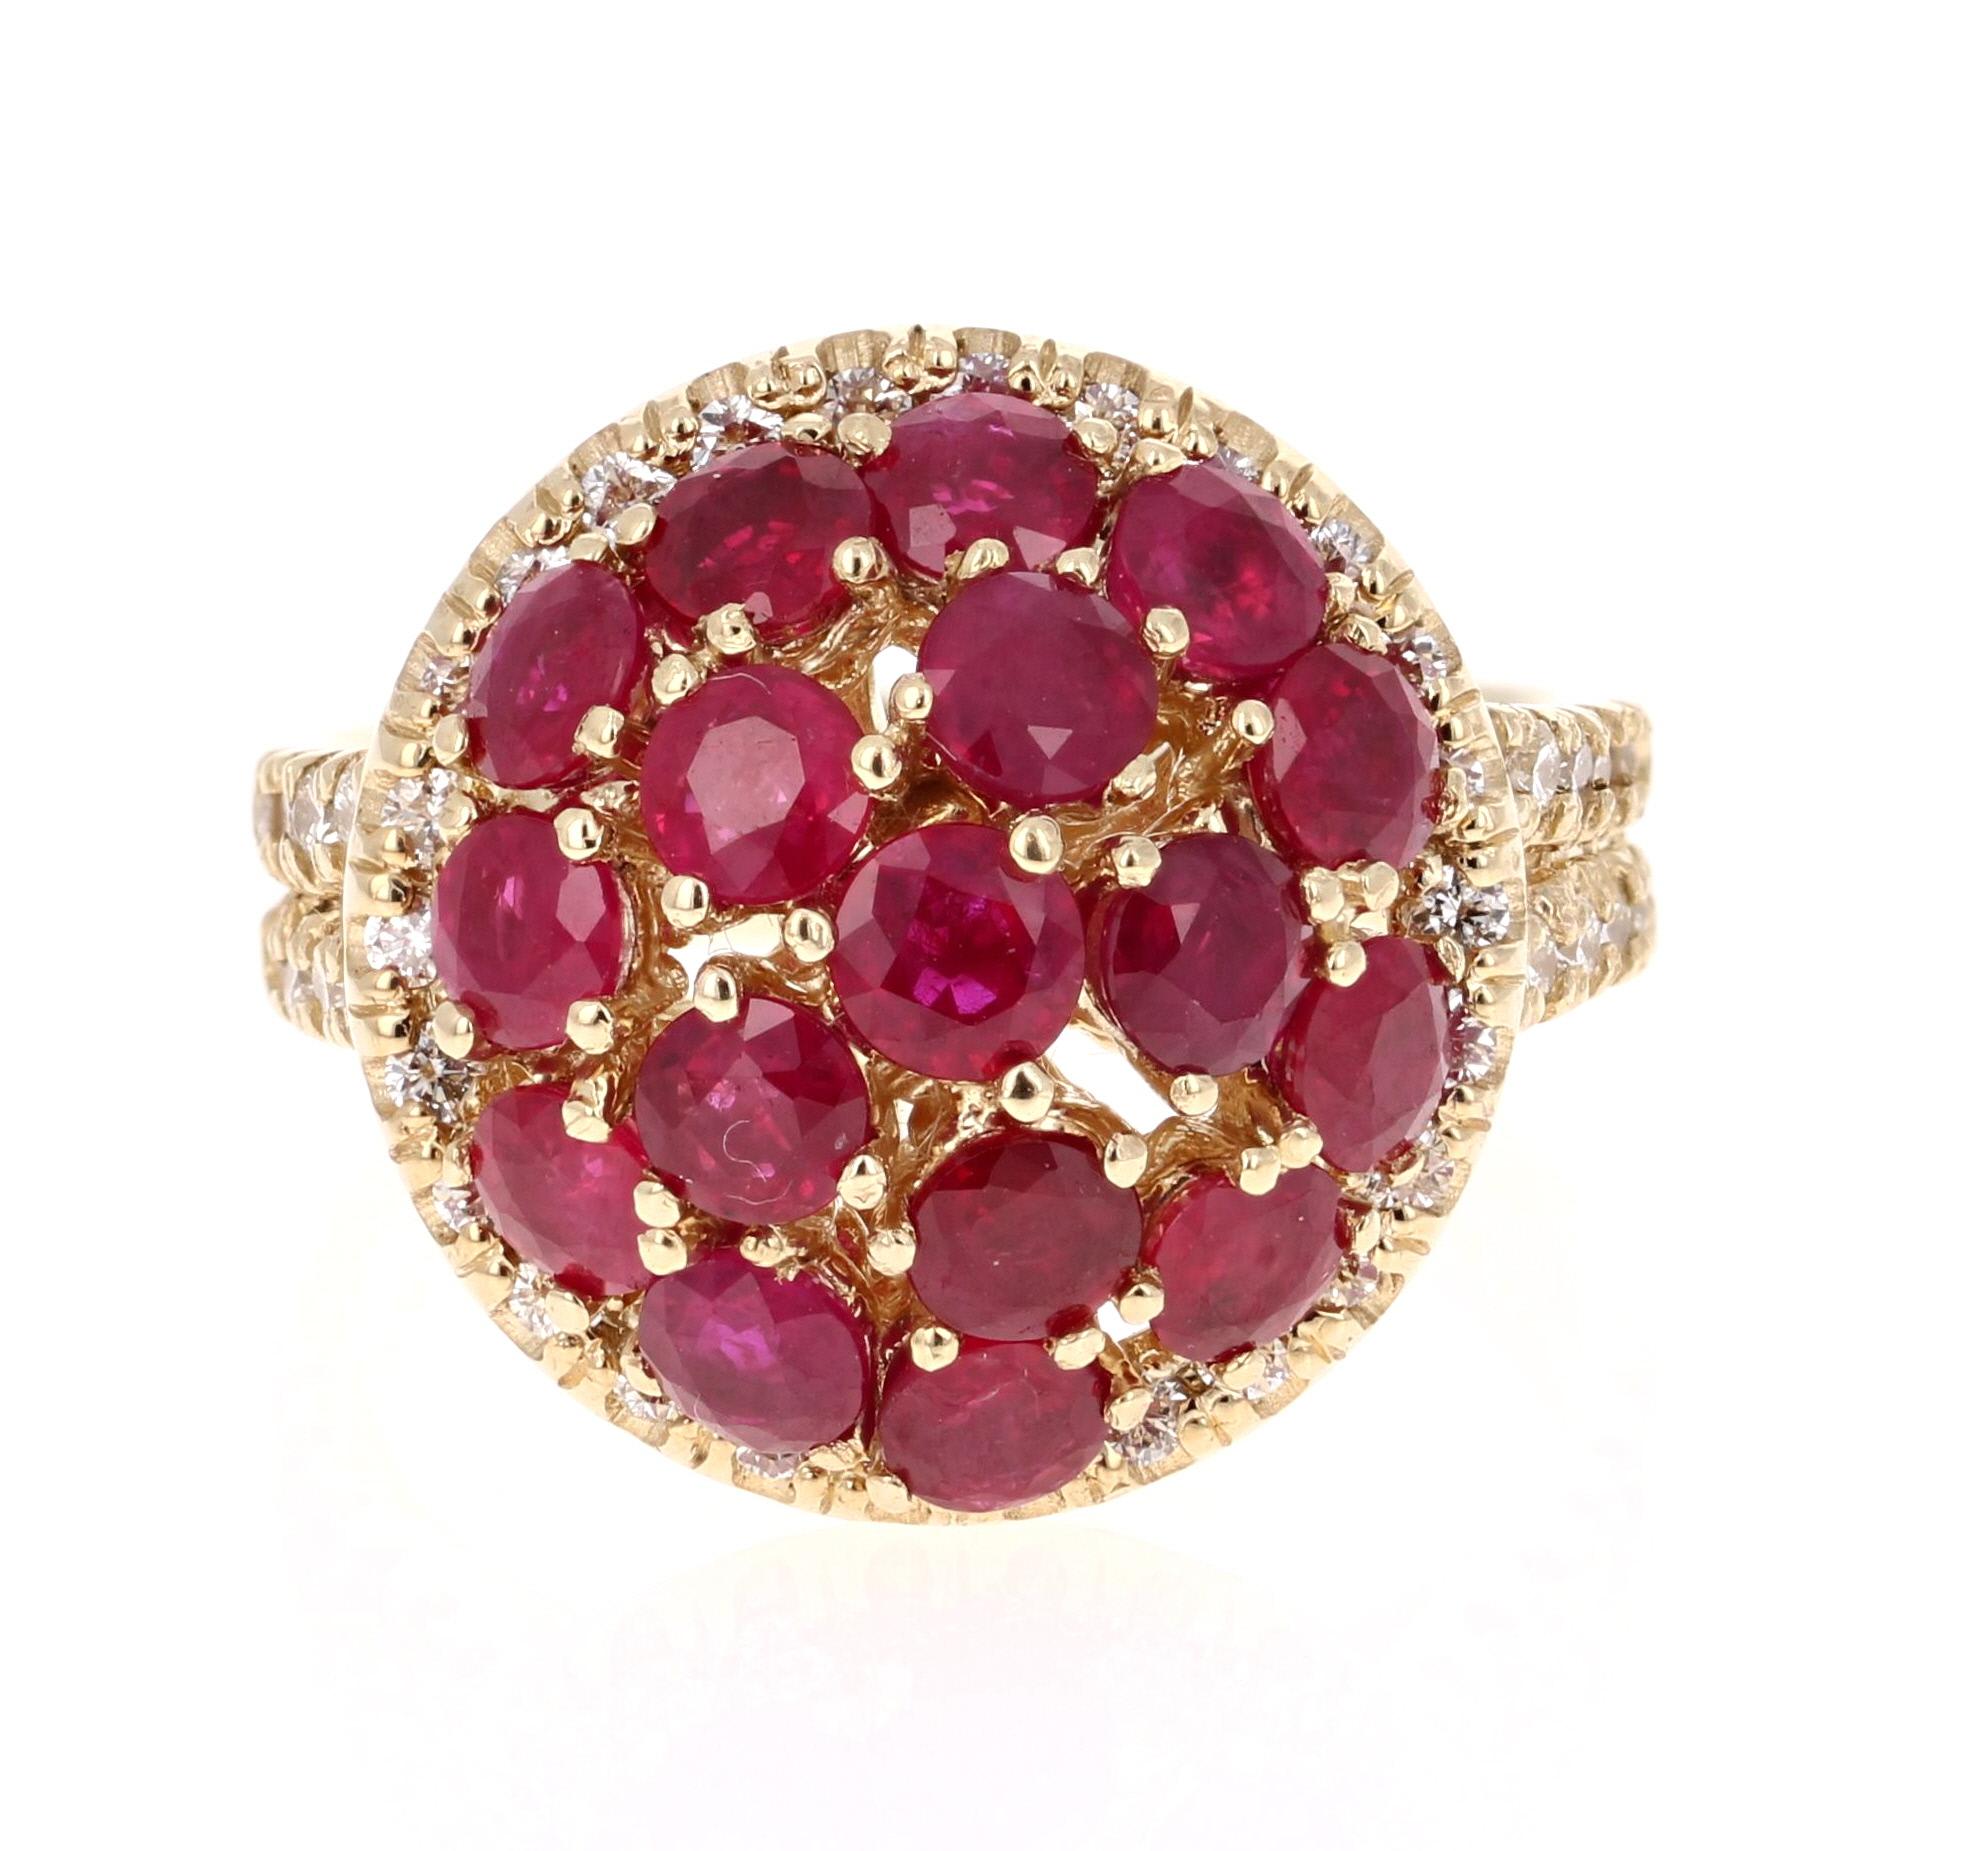 This is a breath-taking Ruby and Diamond Cluster/Cocktail Ring.  

There is cluster of 17 Burmese Round Cut Rubies that weigh 3.20 carats. The Rubies are surrounded by 56 Round Cut Diamonds that weigh 0.72 carats (Clarity: VS2, Color: H). The total